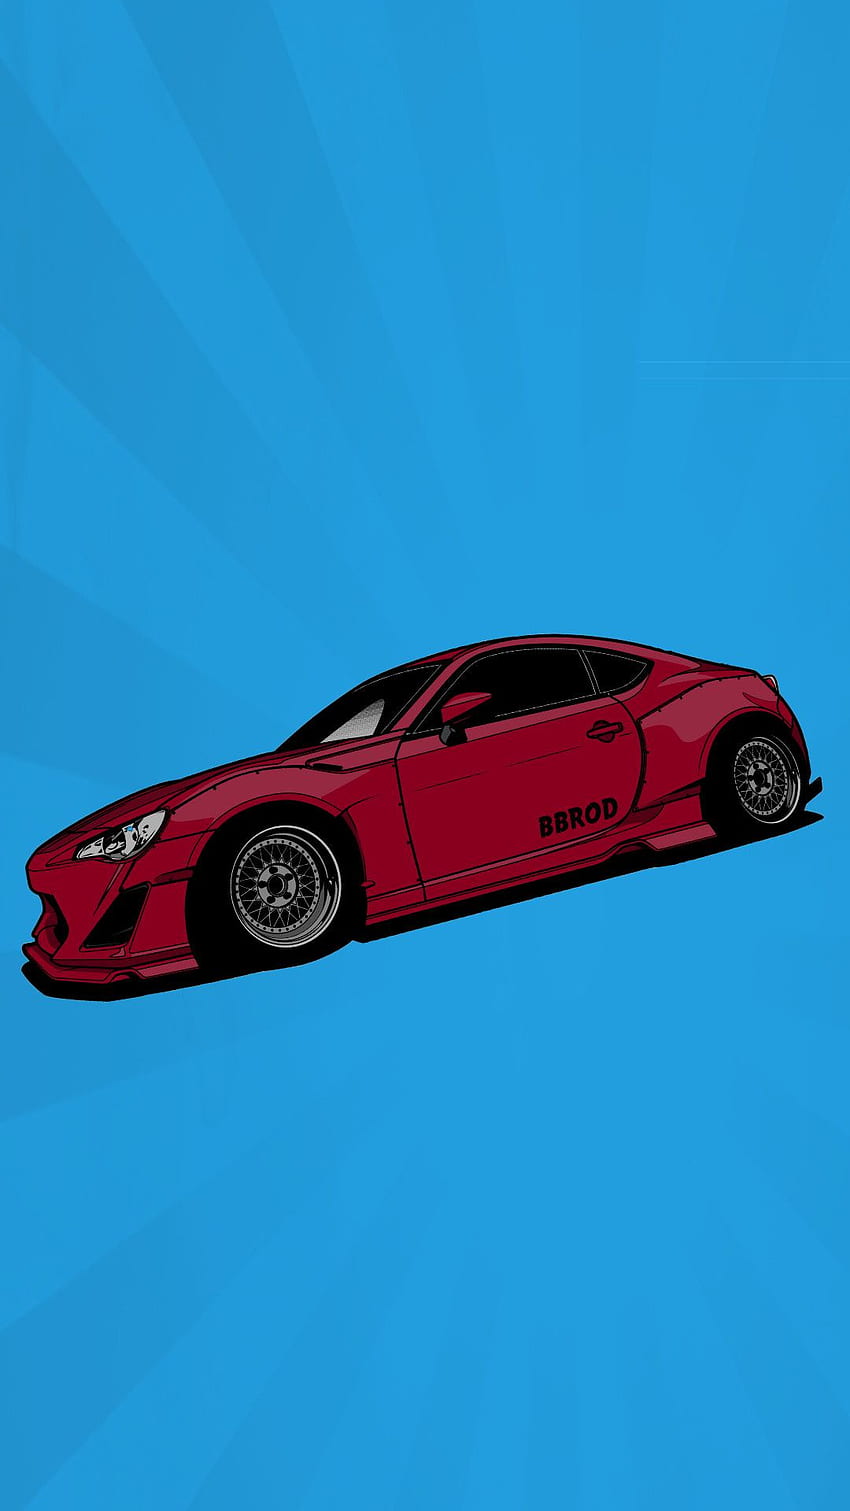 ܓ10480 Jdm iPhone - Android, iPhone, Background / (, ) ( Background / Android / iPhone) (, ) () (2021), JDM Car Papel de parede de celular HD